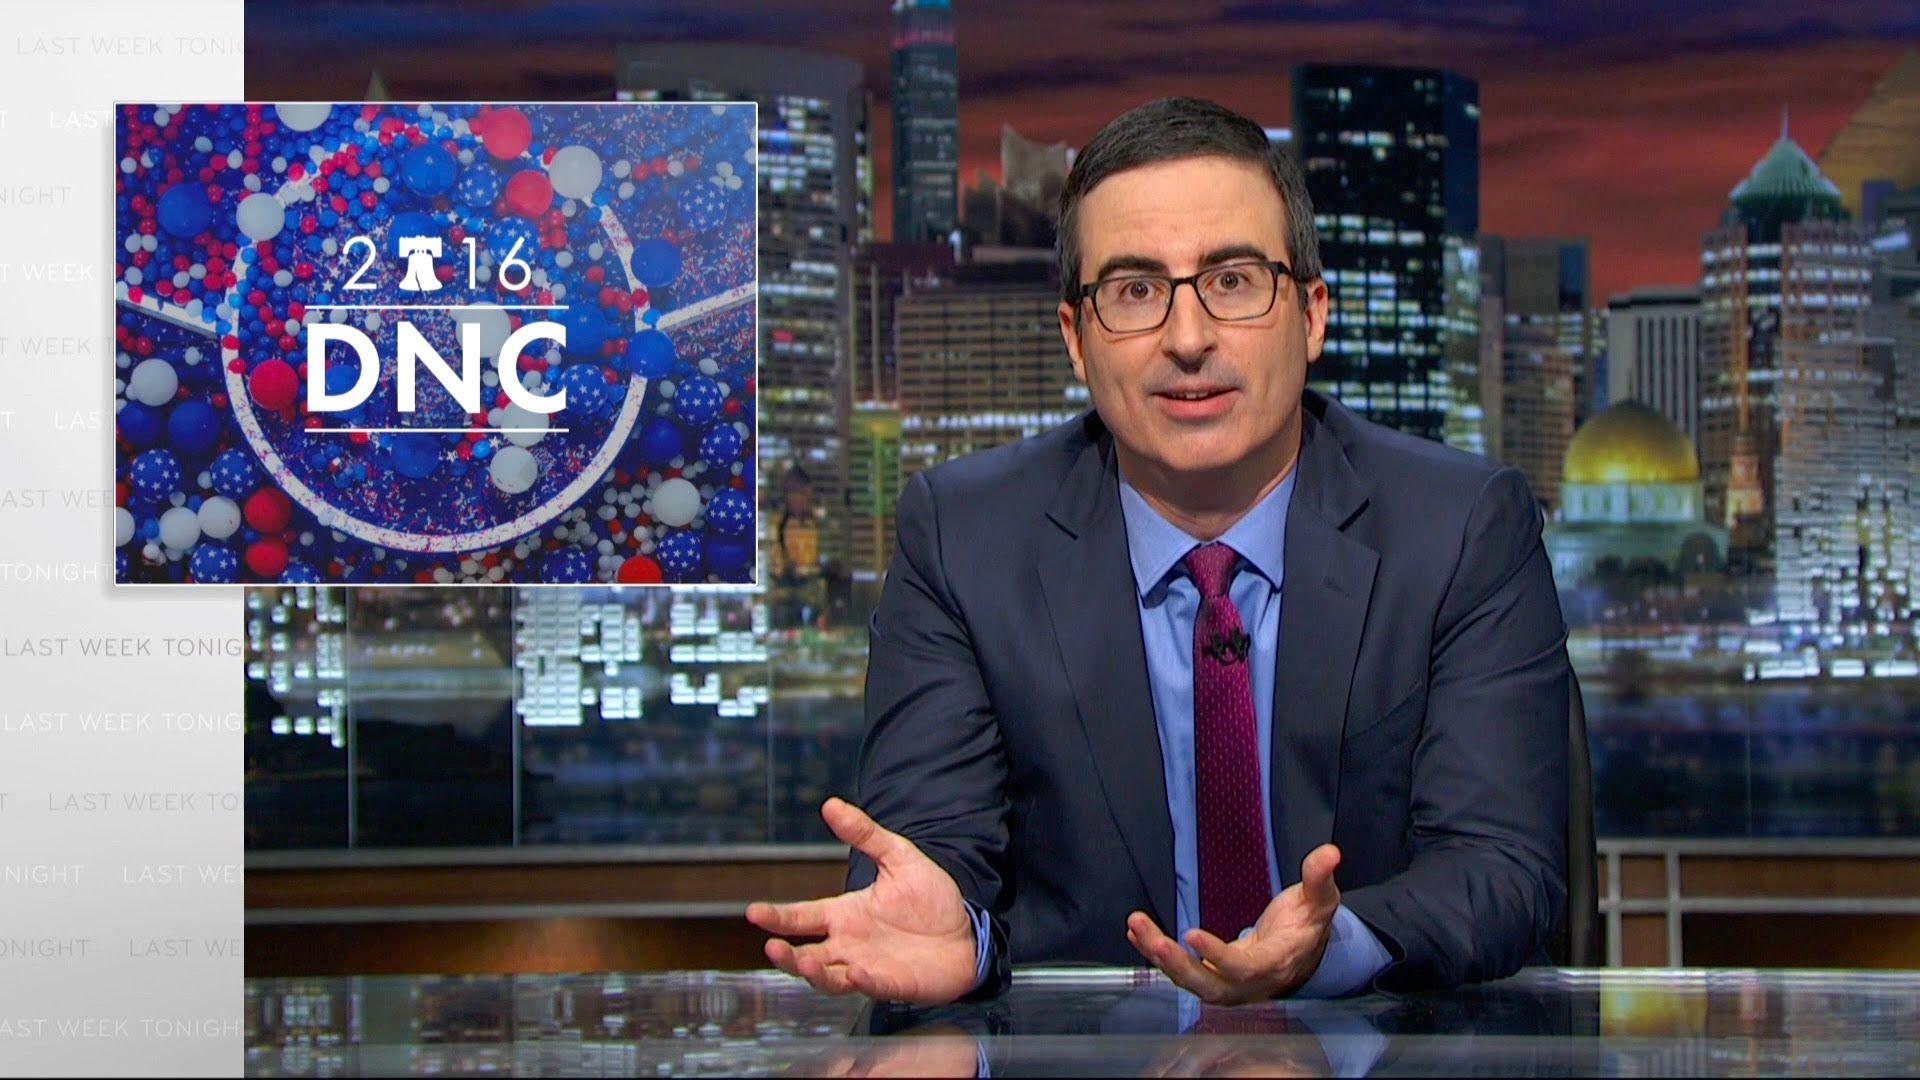 WATCH: John Oliver Compares Donald Trump to Bed of Nails 102.9